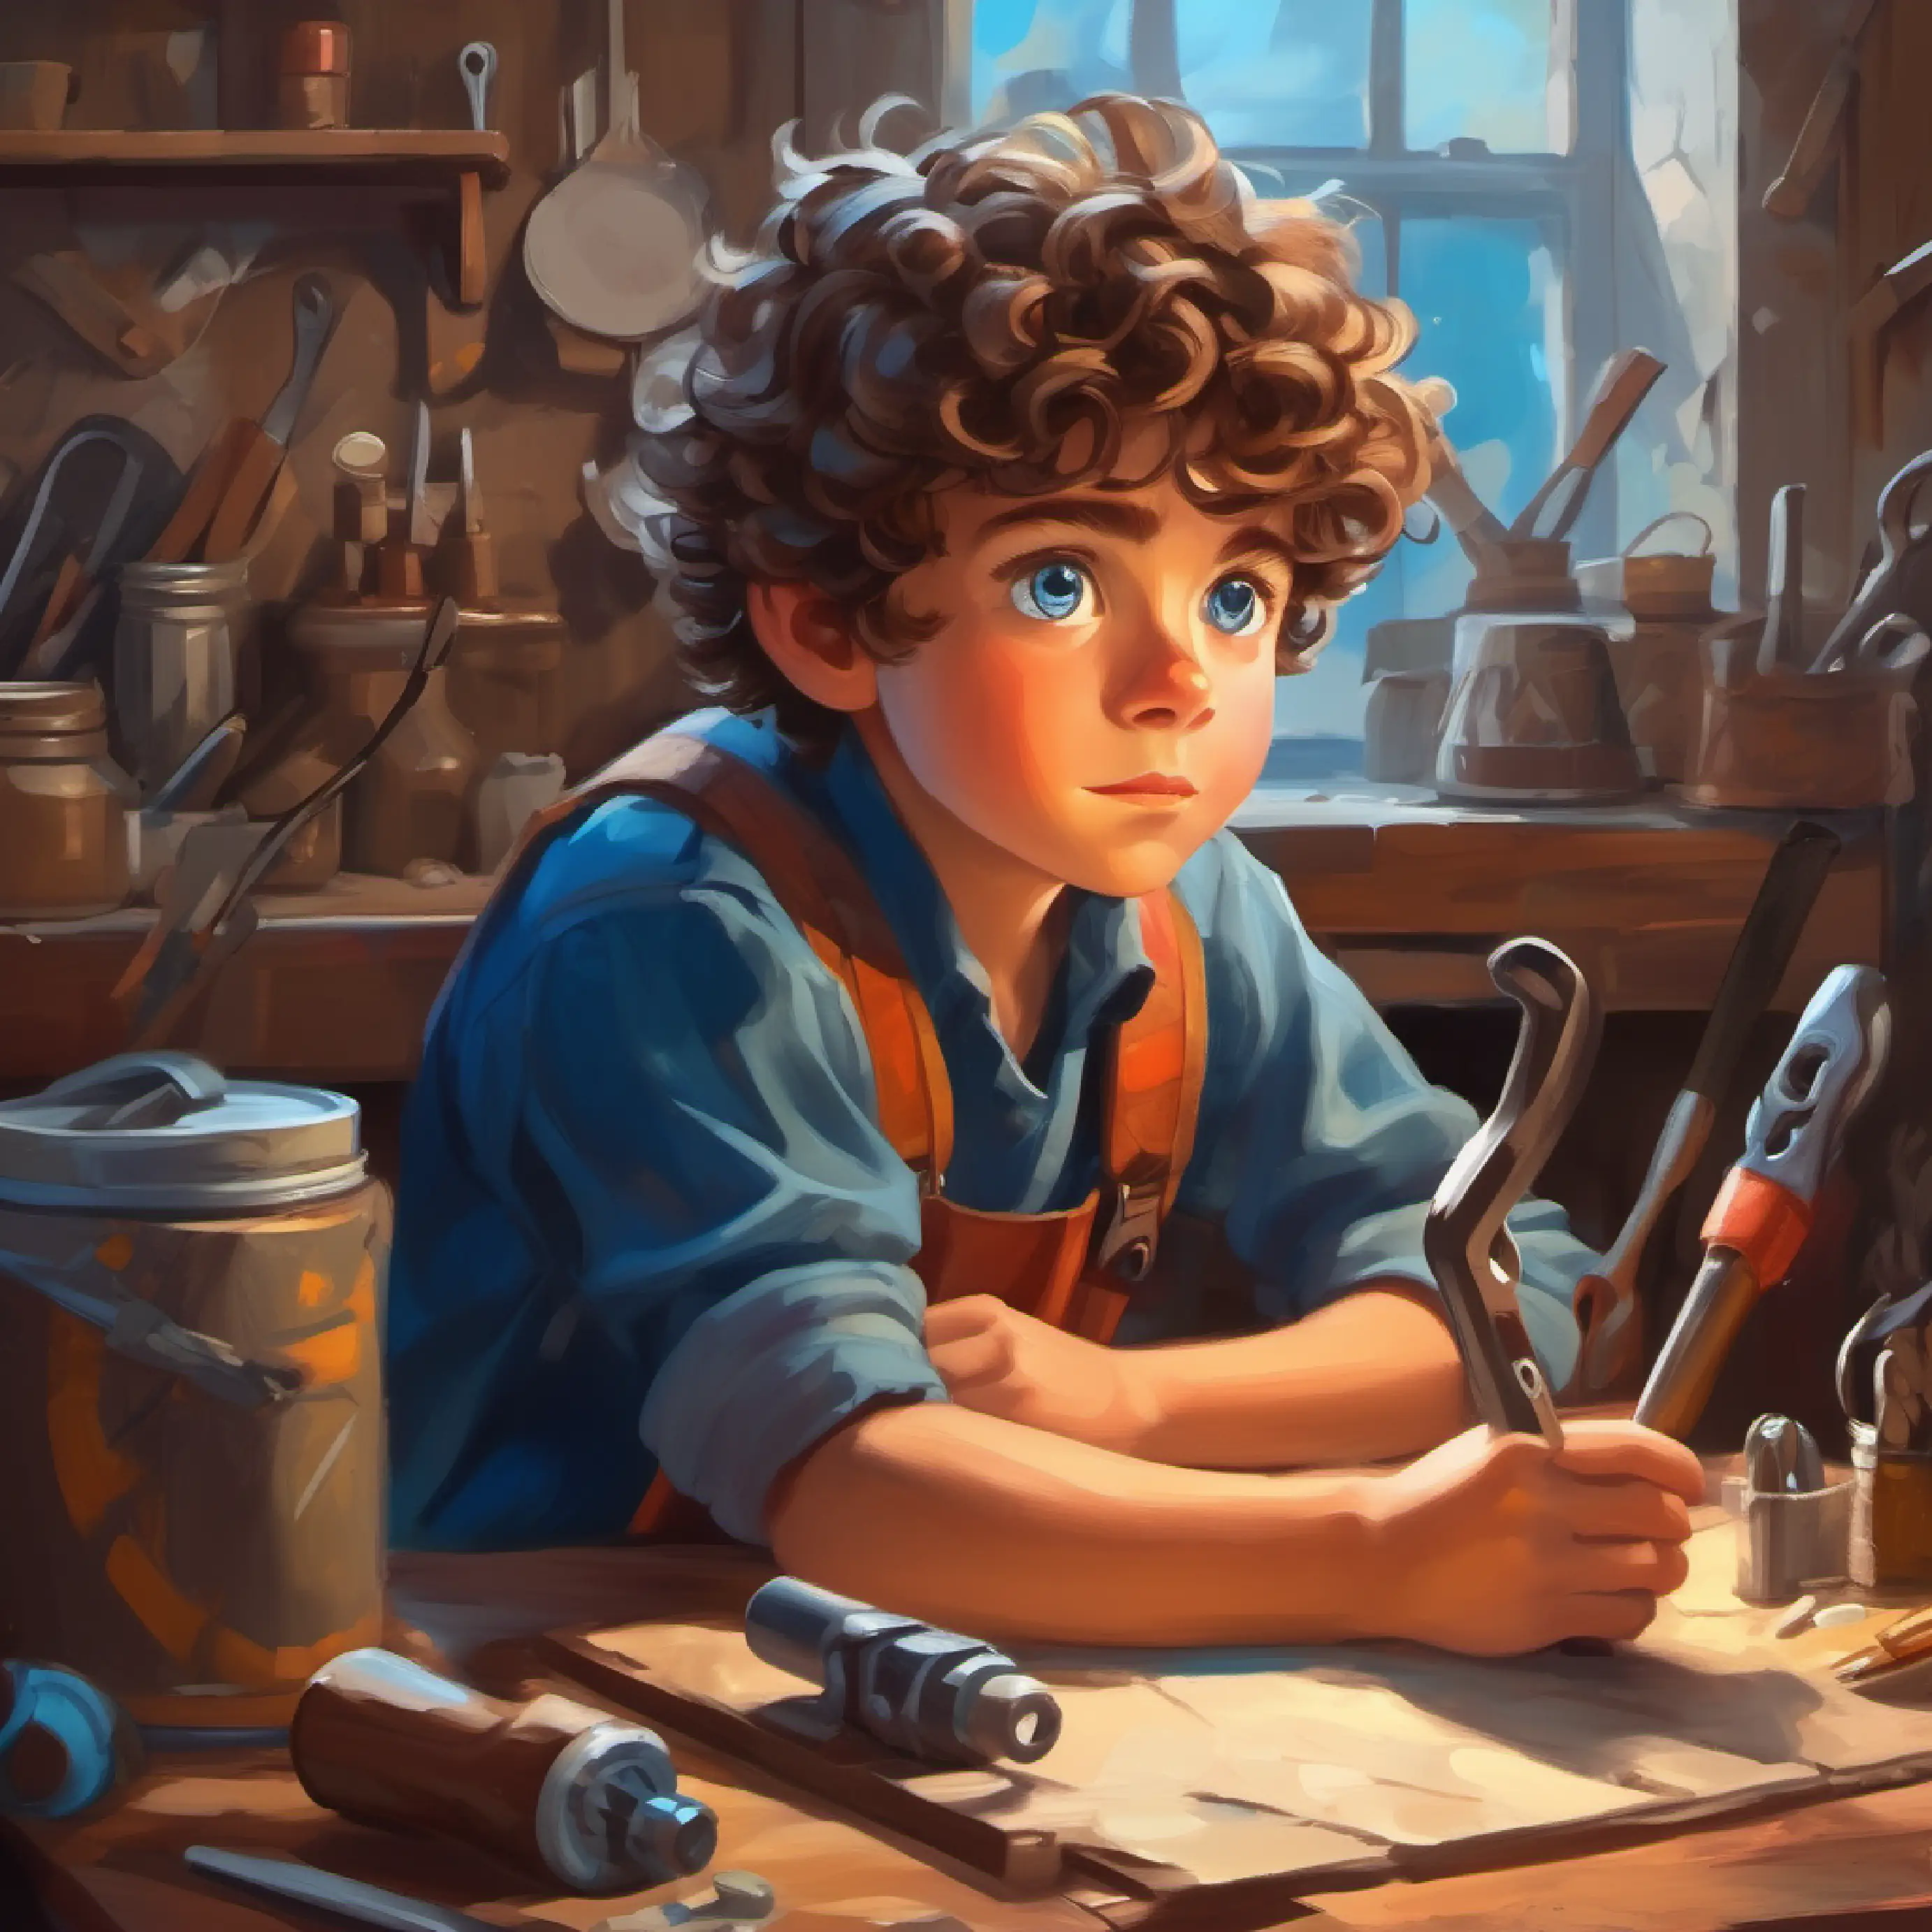 Shows A young boy, eager, with curly brown hair and big blue eyes with his tools, establishing his blaming habit.